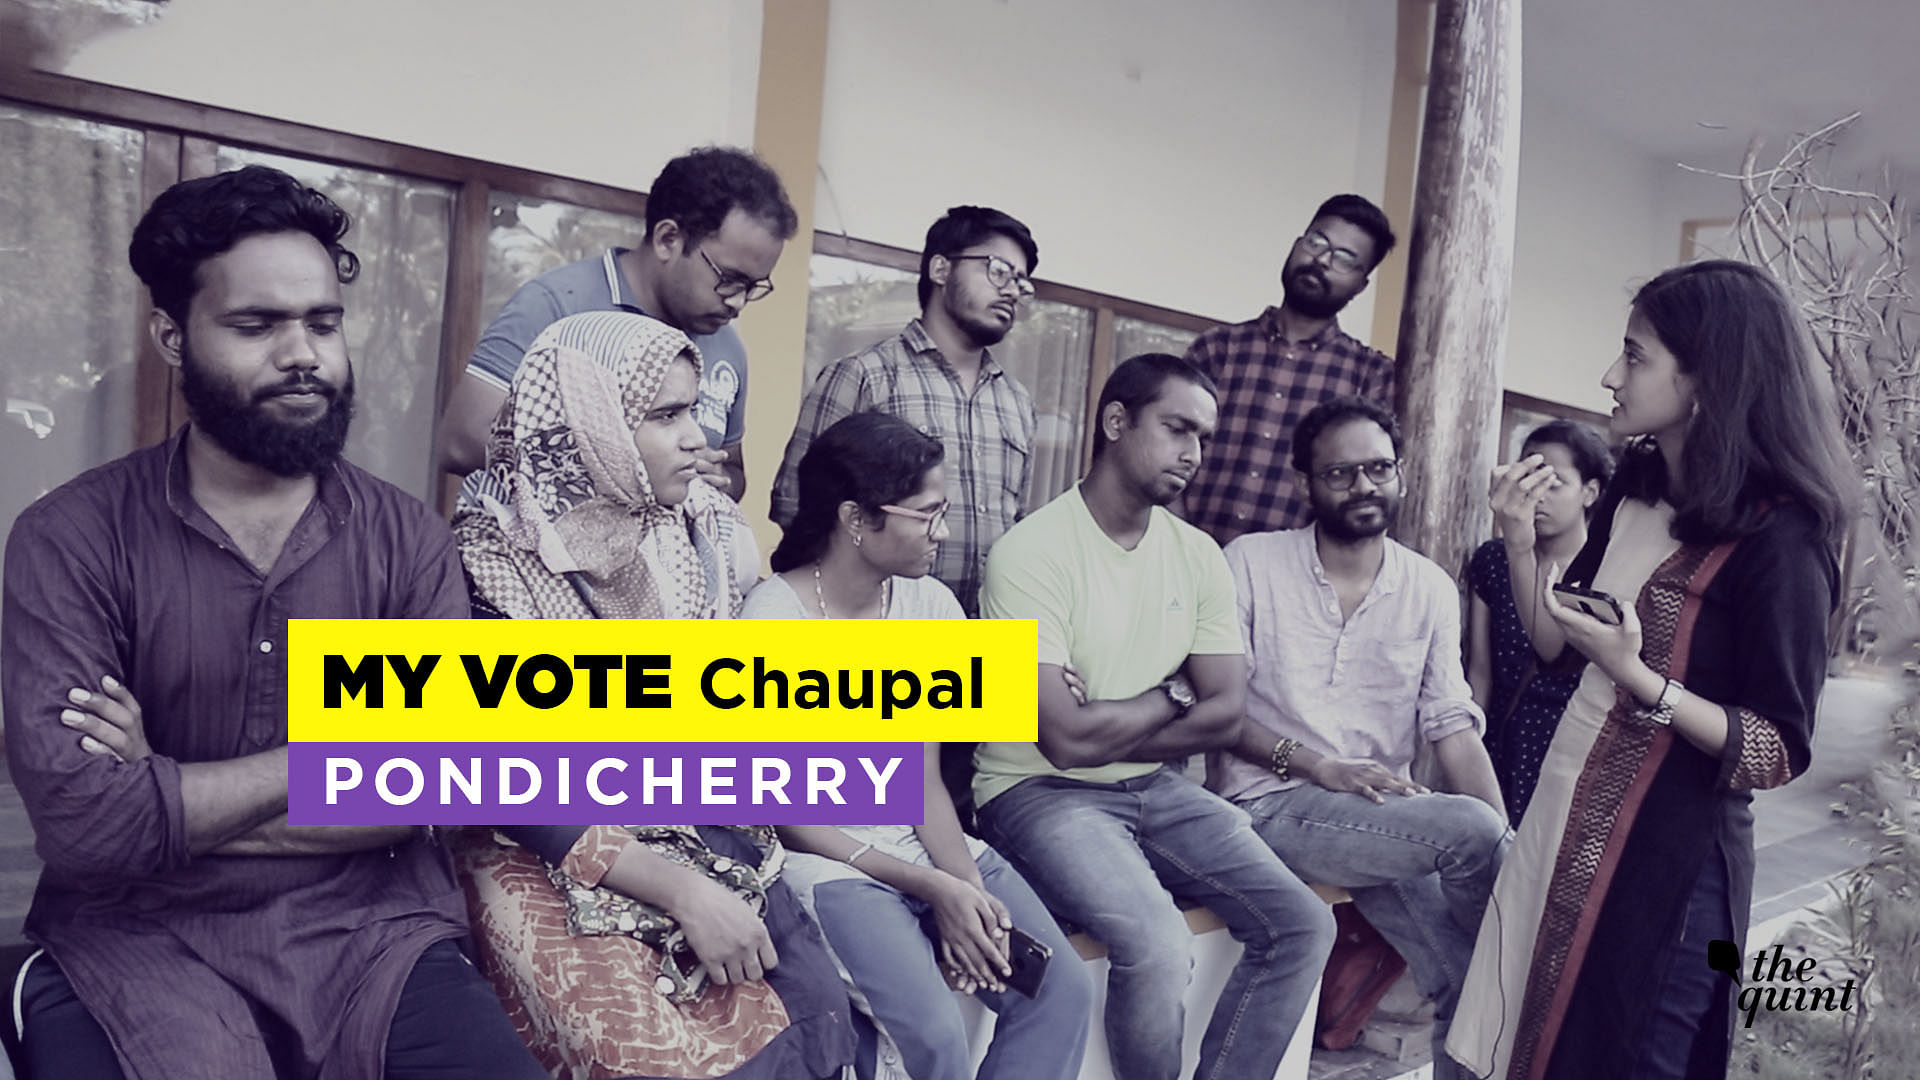 Students of Pondicherry University talk about the past tenure of the Narendra Modi led government, the most pressing issues today and what is it they want from the next leader.&nbsp;